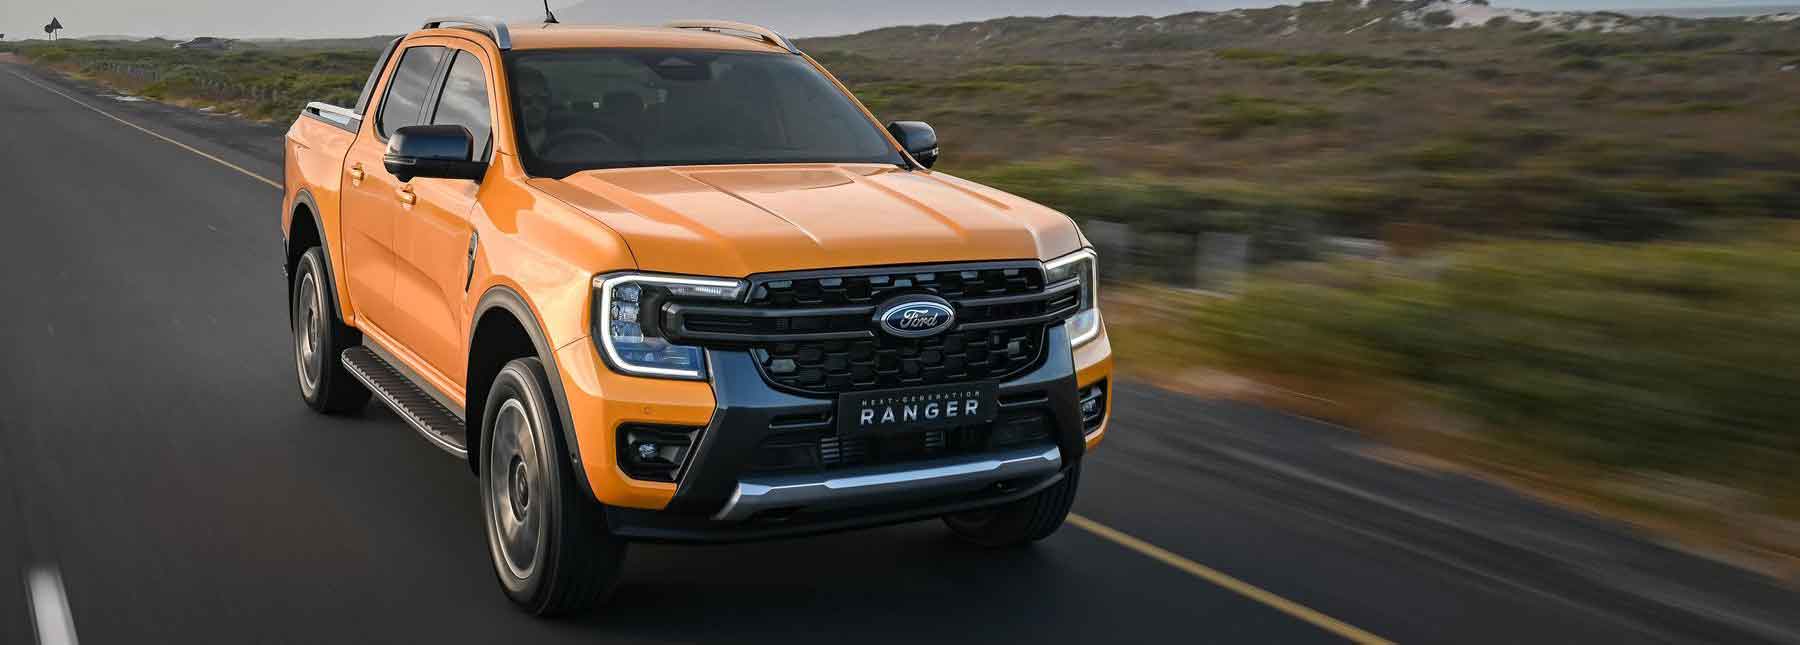 Ford Ranger wins SA Car of the Year title